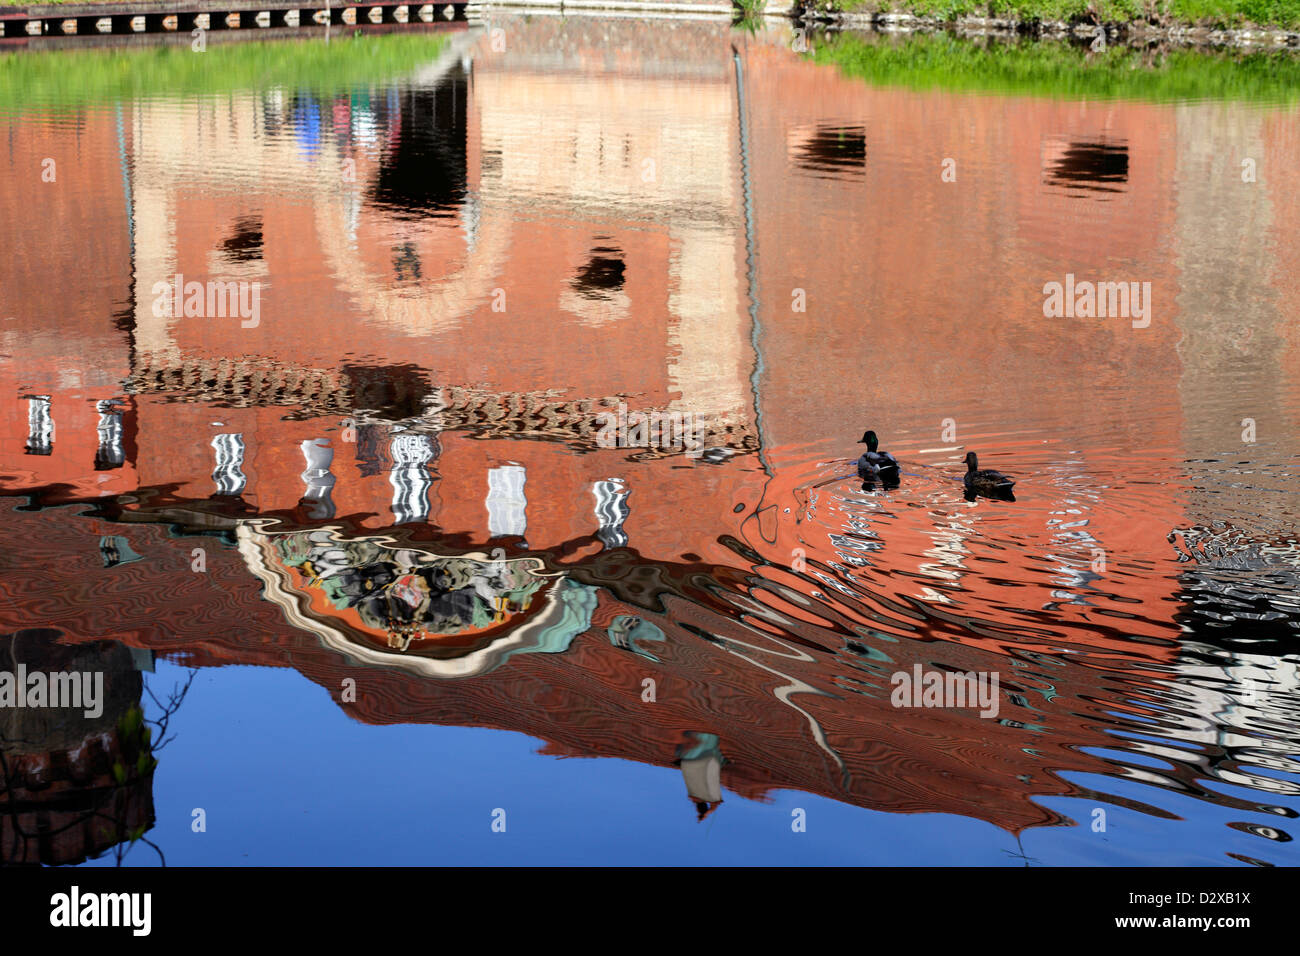 Berlin, Germany, the Spandau Citadel is reflected in the moat Stock Photo